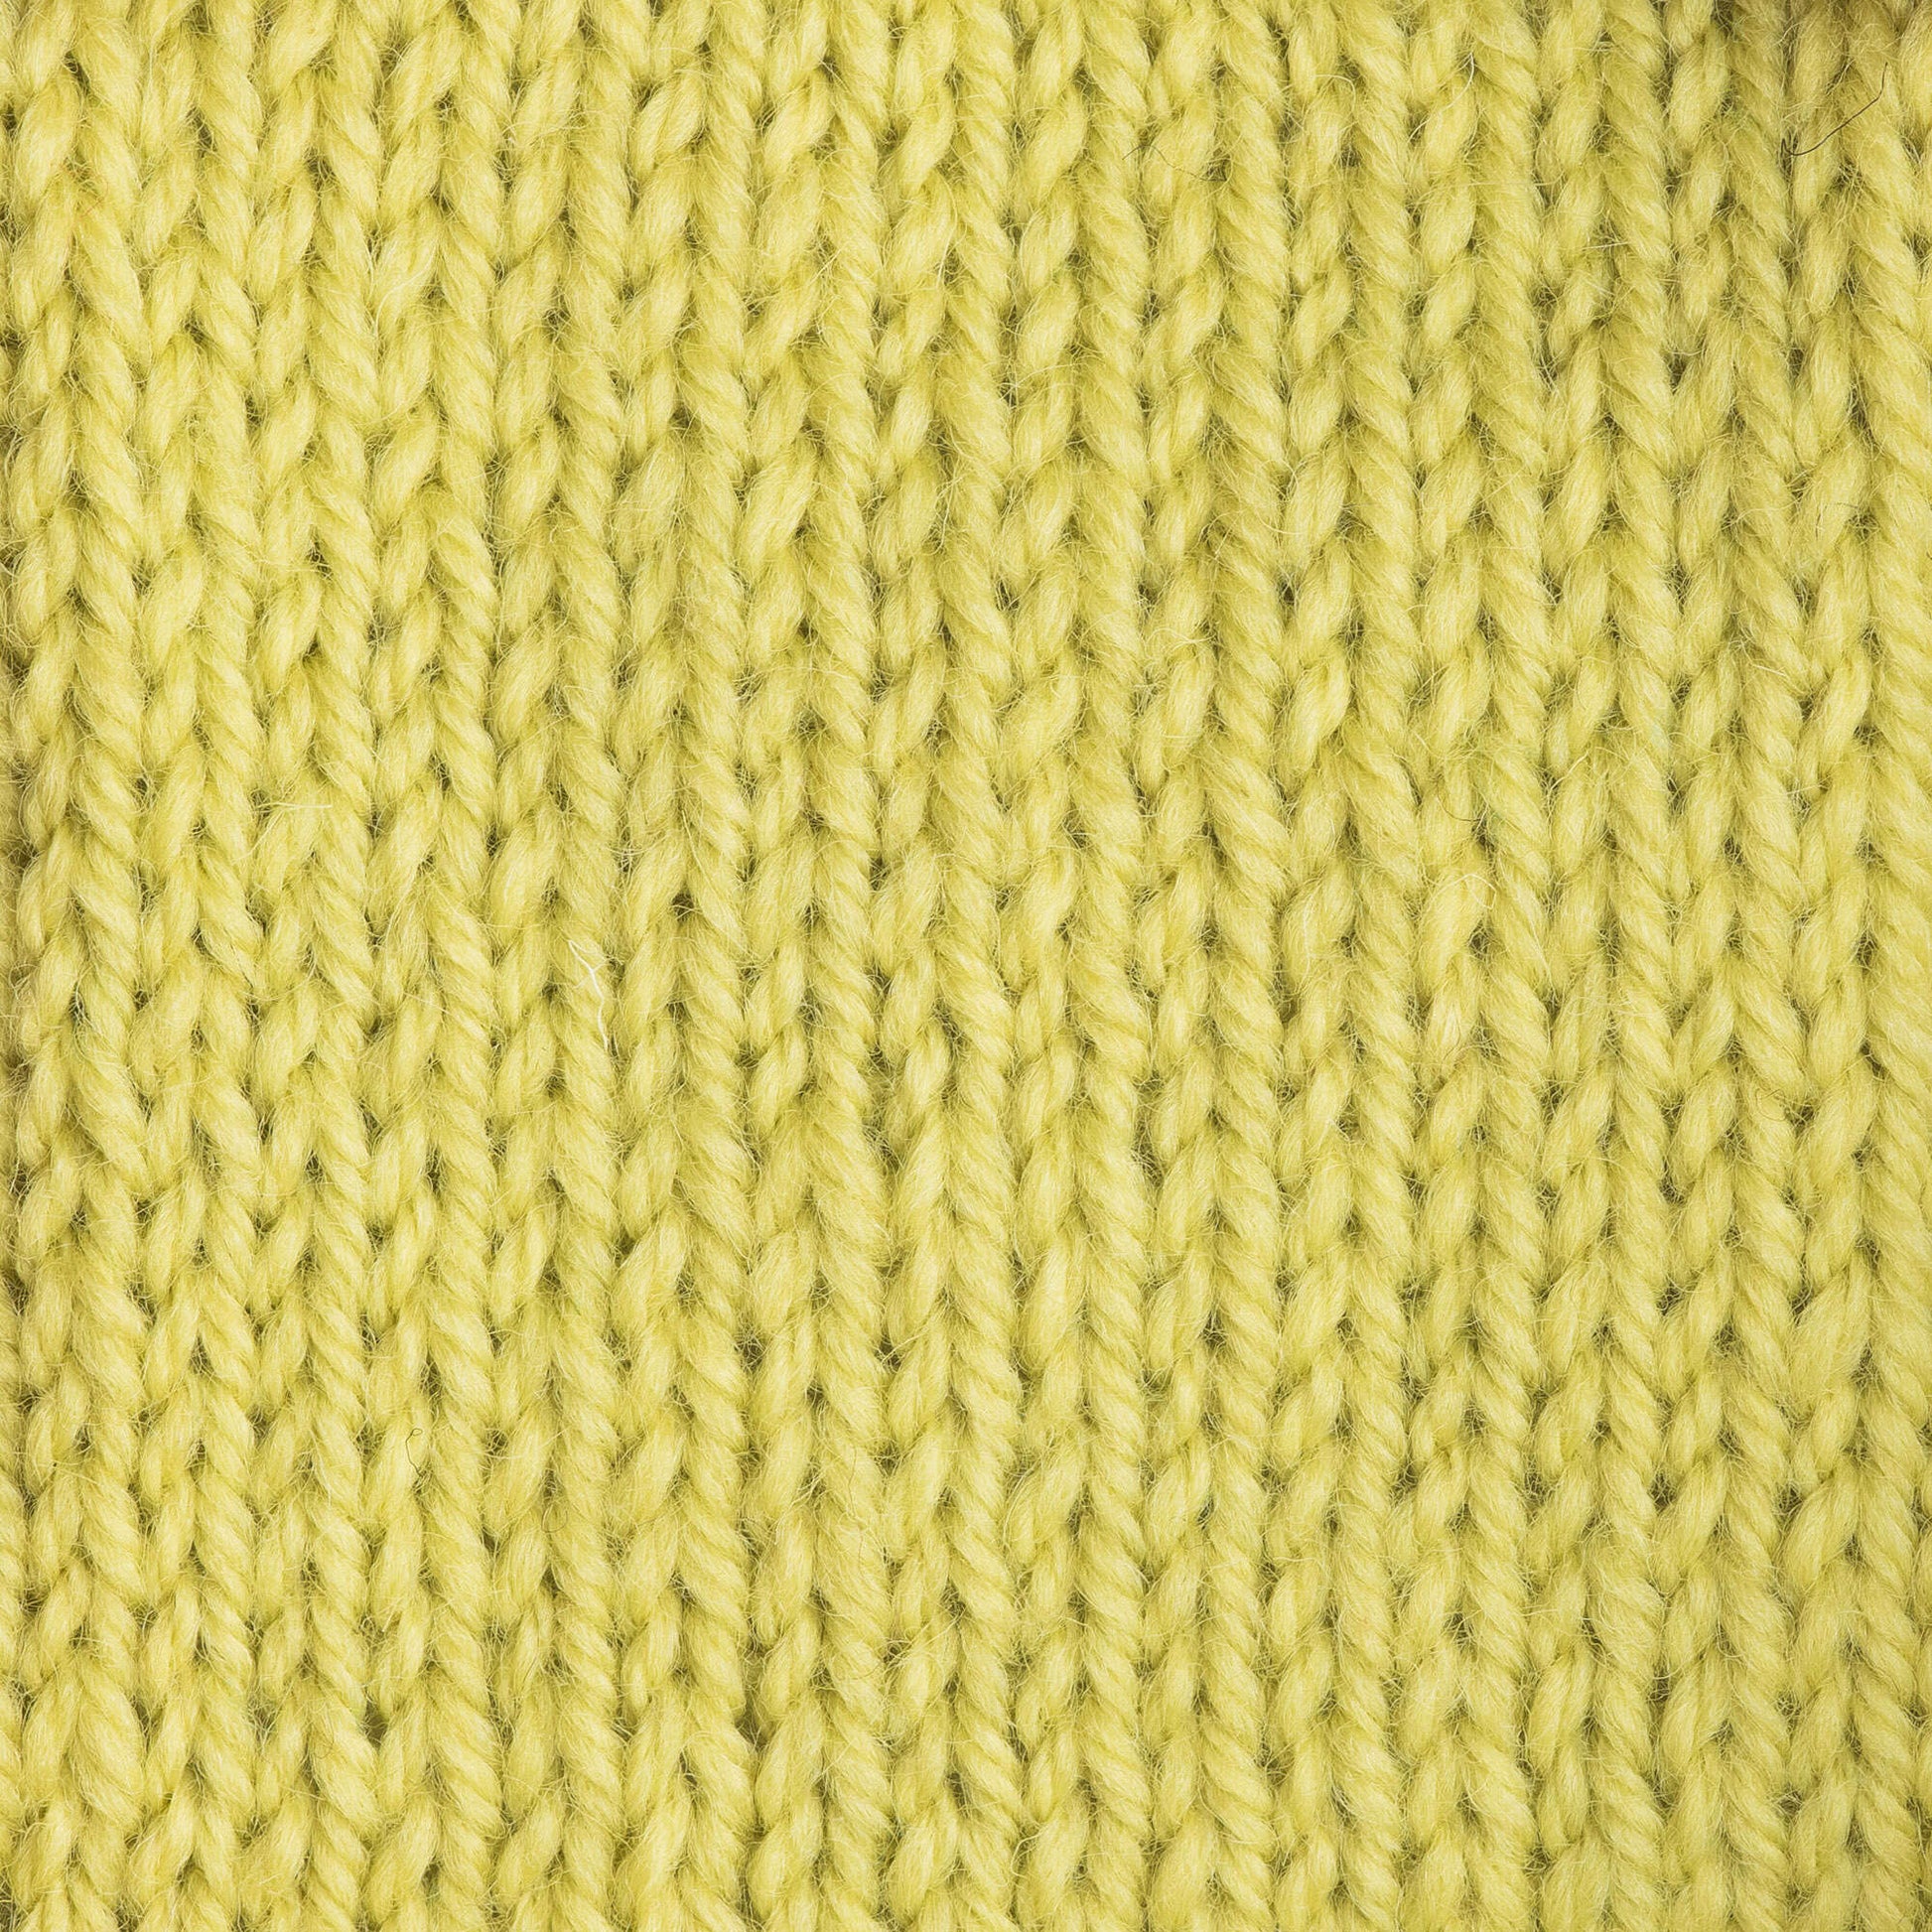 Patons Classic Wool Worsted Yarn - Discontinued Shades Lemongrass